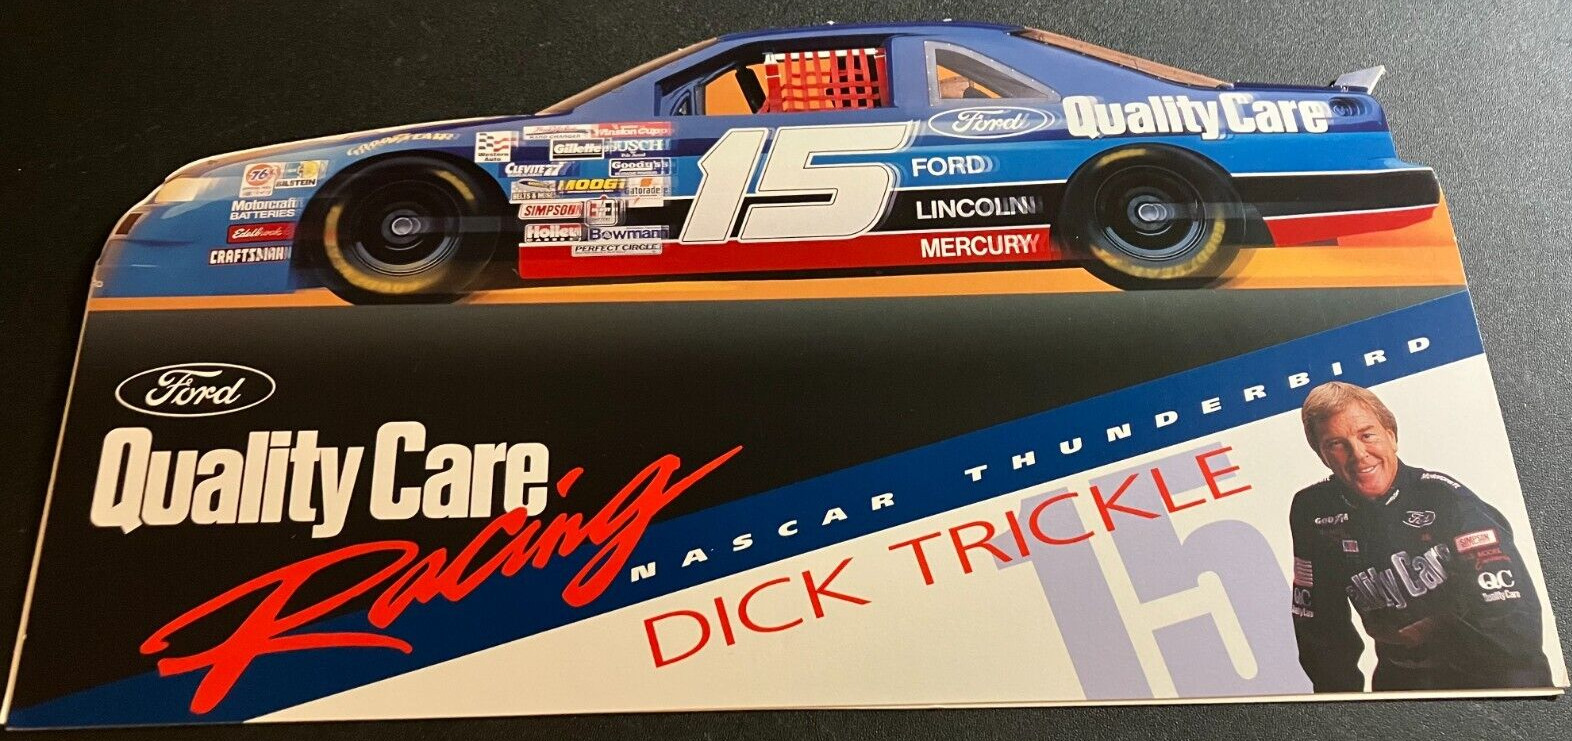 1995 Dick Trickle #15 Quality Care Ford T-Bird - Vintage 2-Page NASCAR Brochure